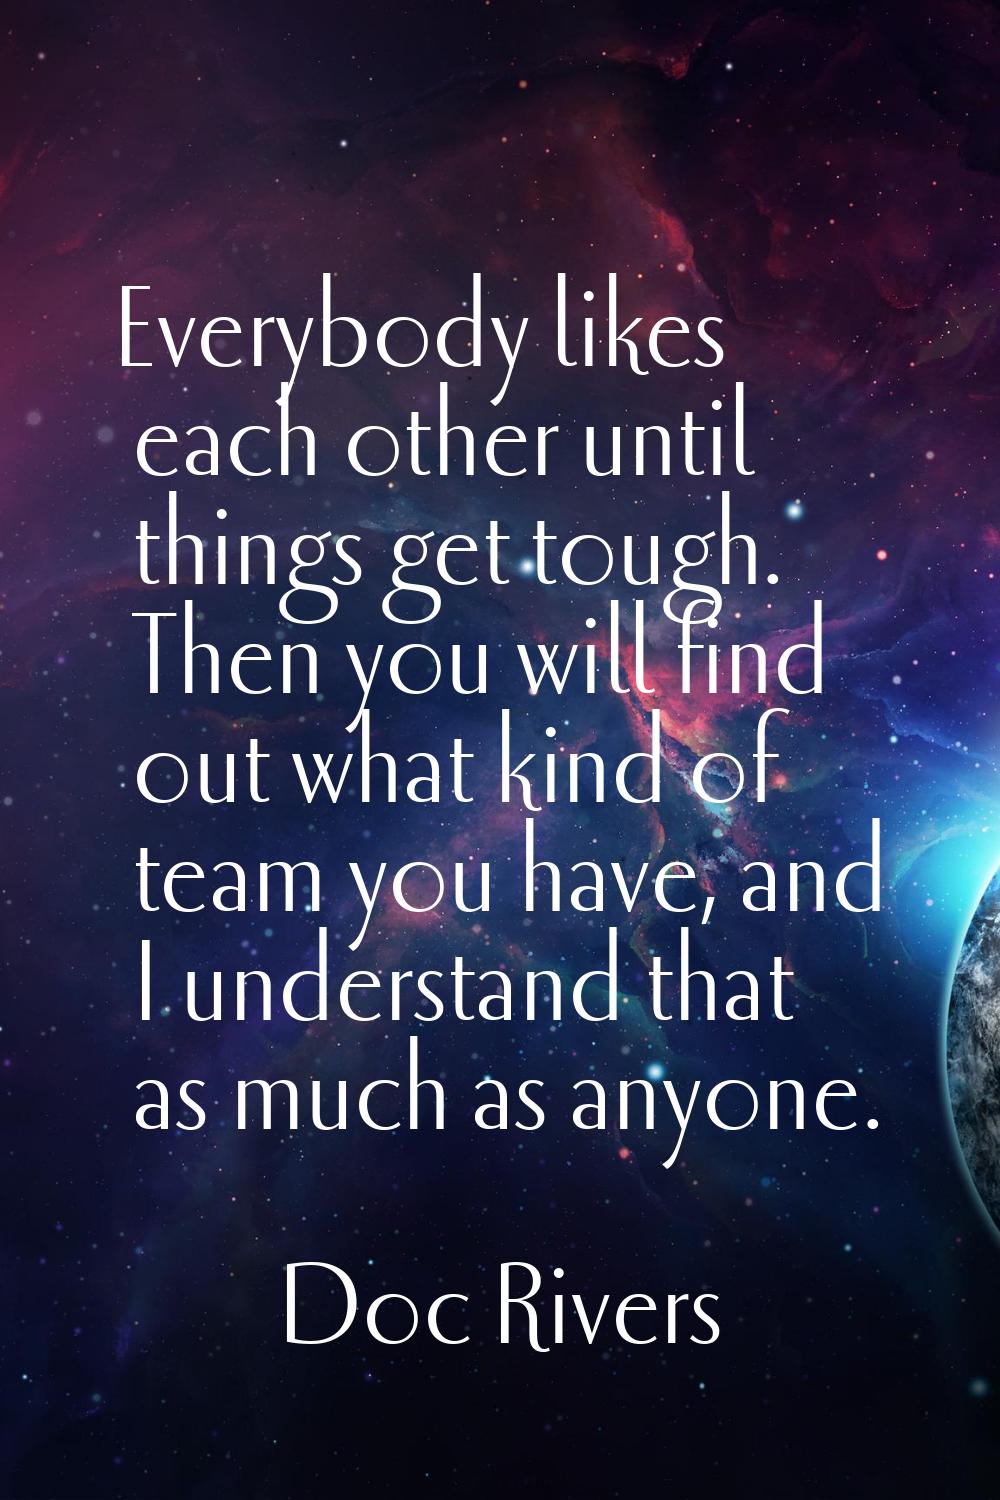 Everybody likes each other until things get tough. Then you will find out what kind of team you hav